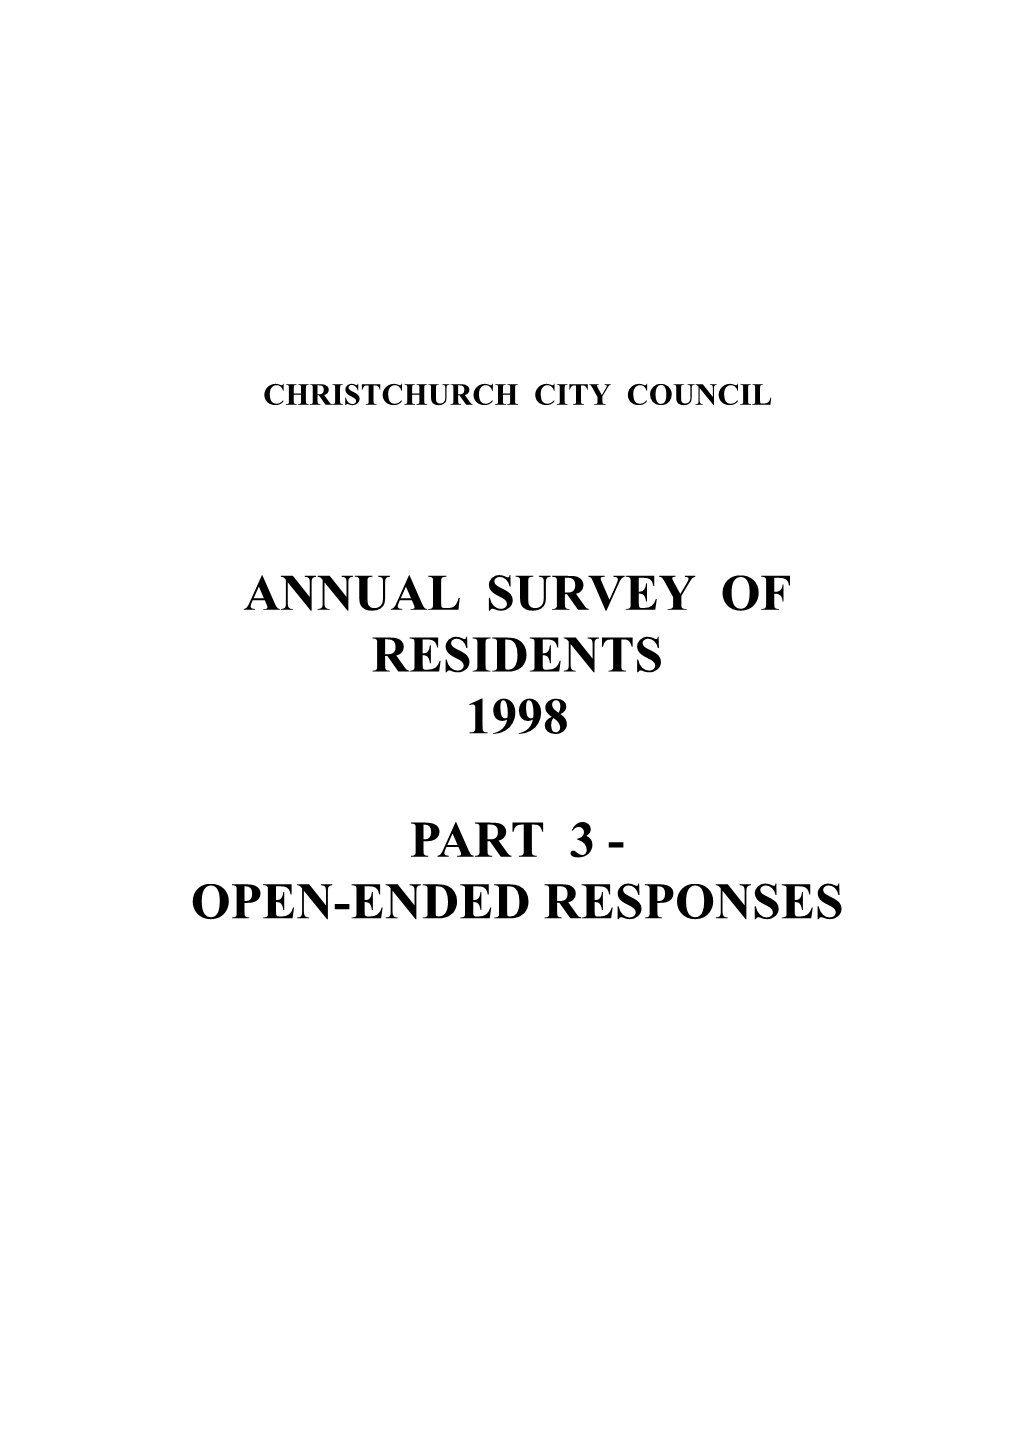 Annual Survey of Residents 1998